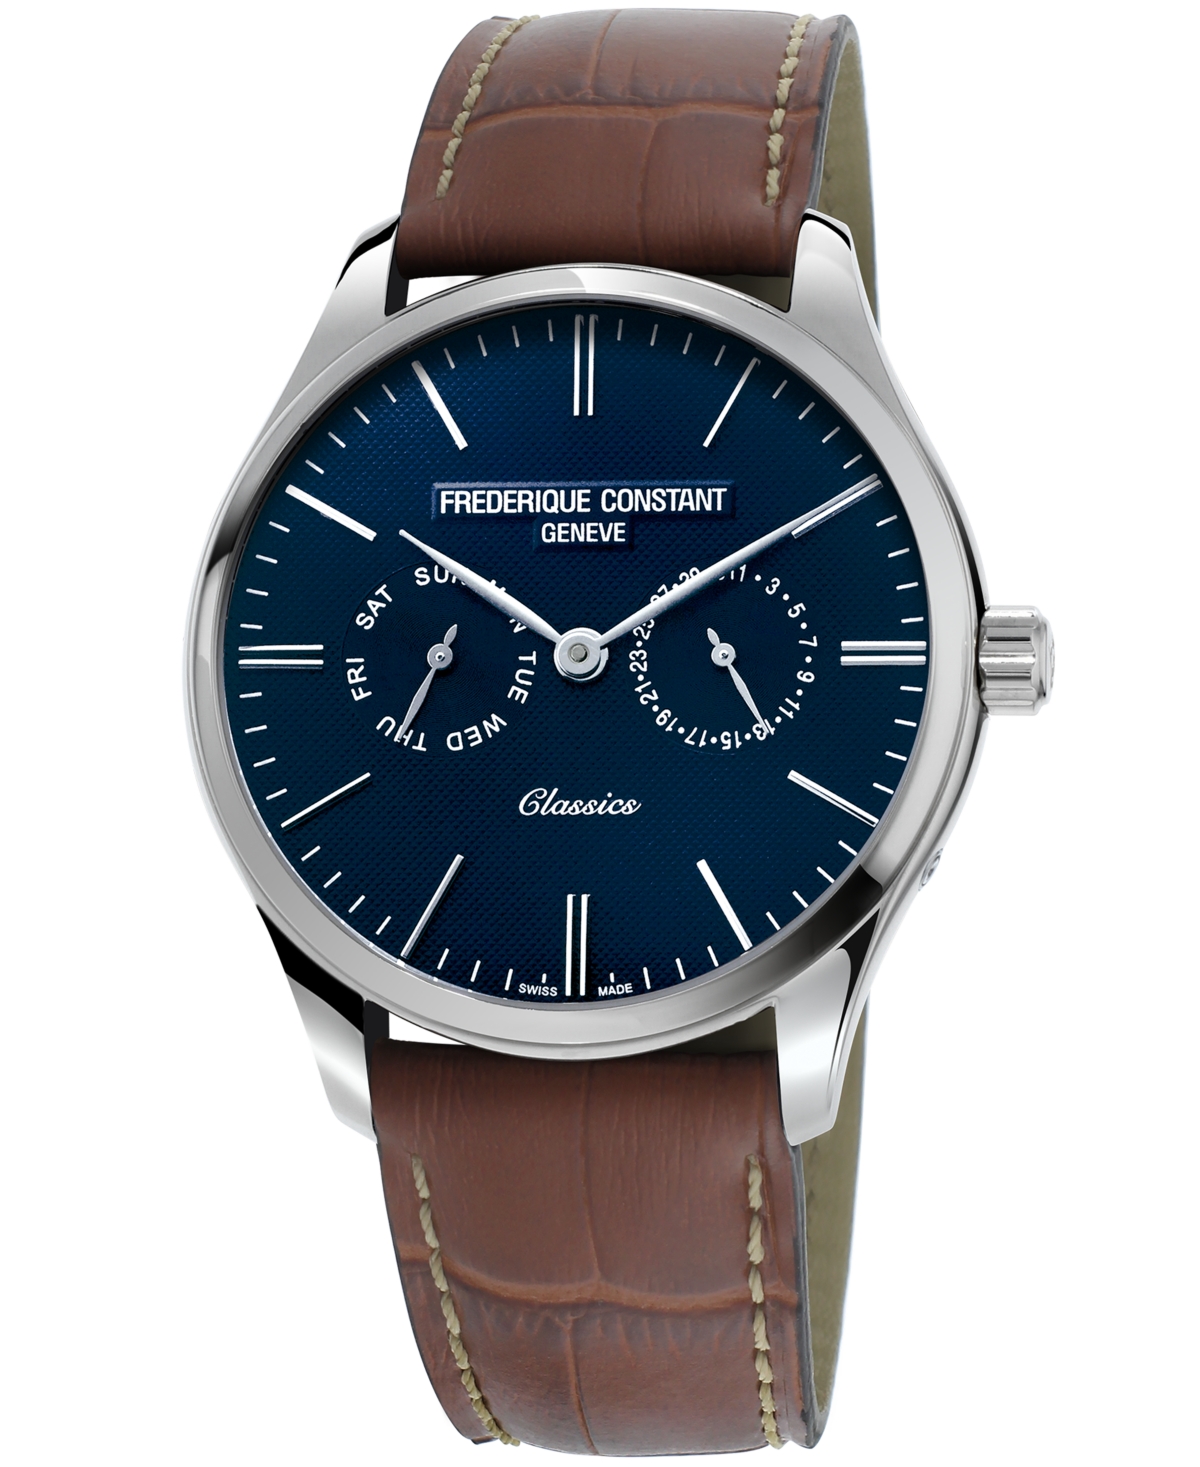 Frederique Constant Men's Swiss Chronograph Classic Brown Leather Strap Watch 40mm